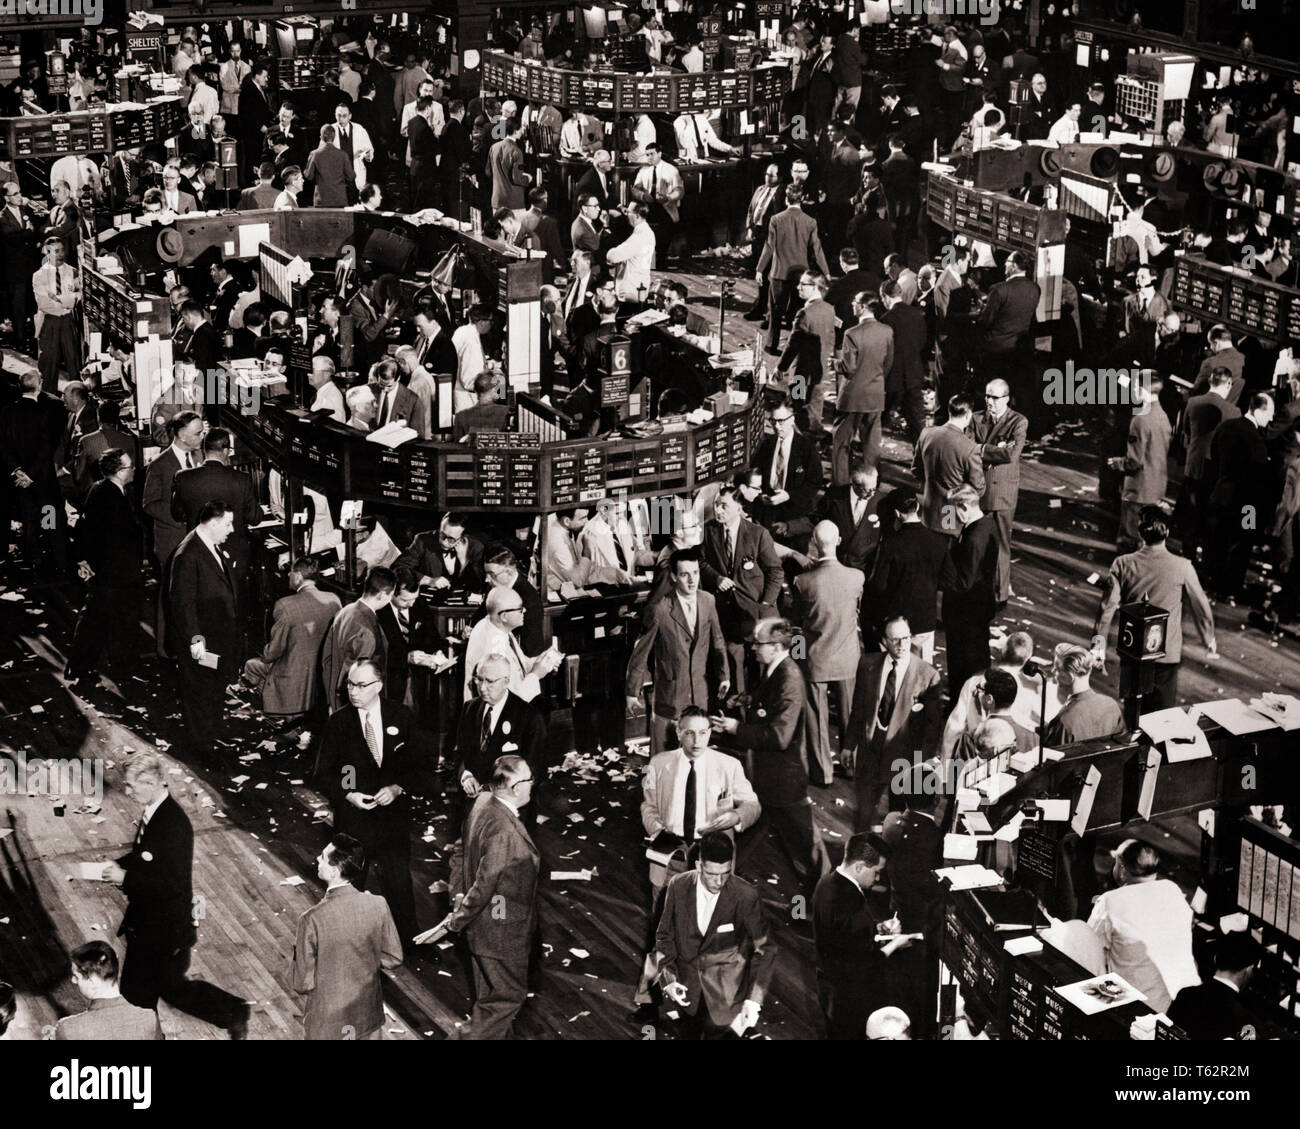 1950s TRADERS ON FLOOR OF NEW YORK STOCK EXCHANGE NYC USA - asp ag 1421 ASP001 HARS OPPORTUNITY NYC OCCUPATIONS STOCKS INVESTMENTS TRADER TRADING BROKERS NEW YORK SECURITIES CITIES MEN ONLY NYSE NEW YORK CITY NO WOMEN ALL MEN WALL STREET BLACK AND WHITE CAUCASIAN ETHNICITY OLD FASHIONED STOCK EXCHANGE TRADERS Stock Photo